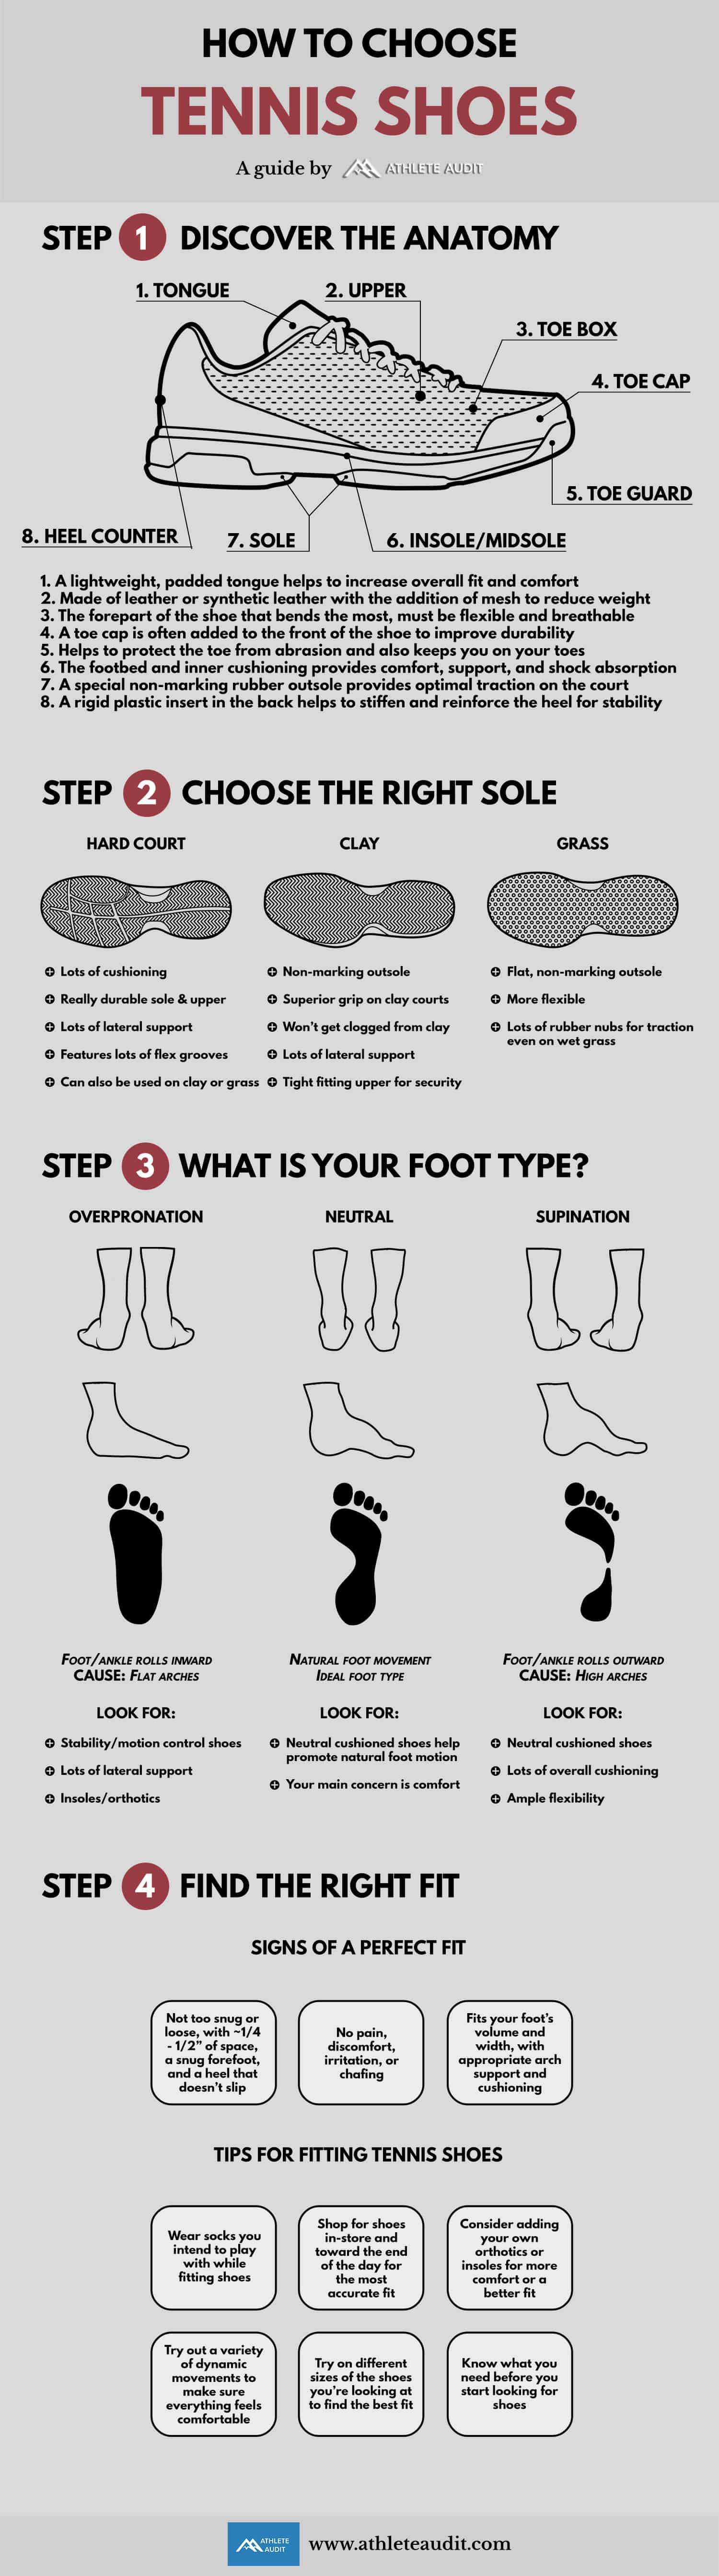 How to Choose Tennis Shoes Infographic